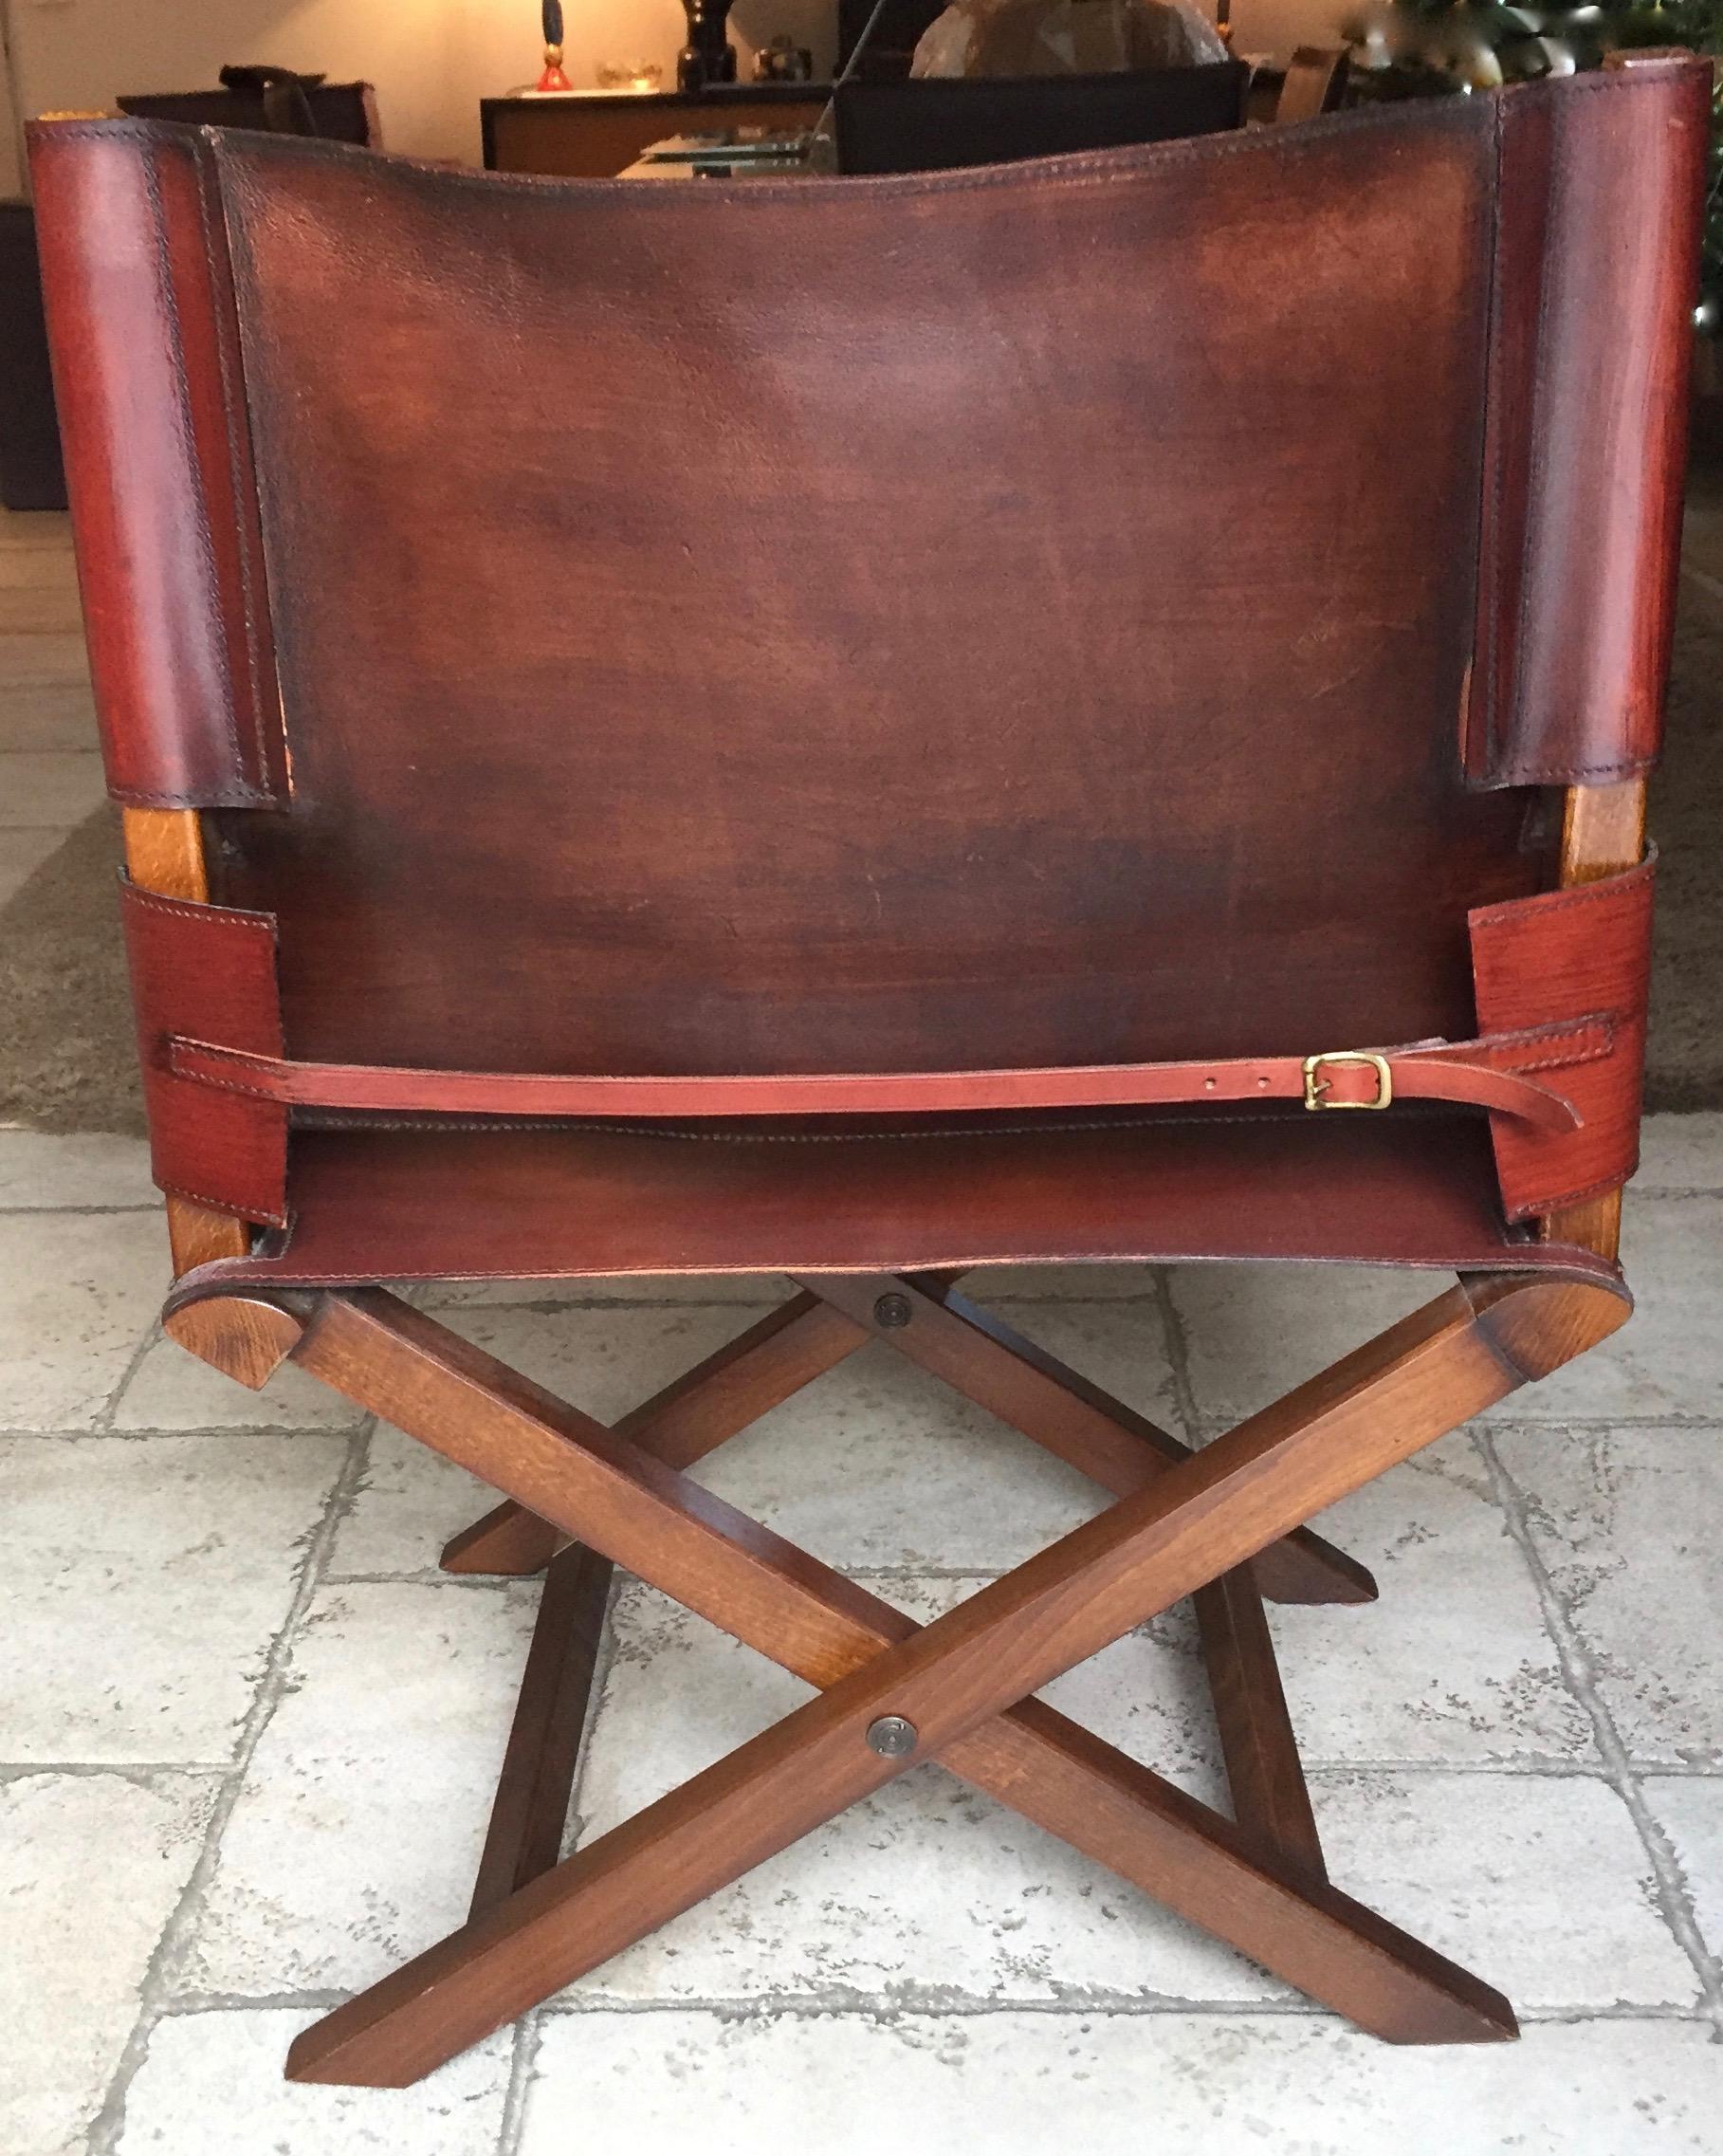 Rare modern folding armchair, seat and backrest in burgundy leather, reproduction of the Napoleon Bonaparte campaign armchair by Grange, a French house founded in 1904. Armchair Numbered 1095.

 